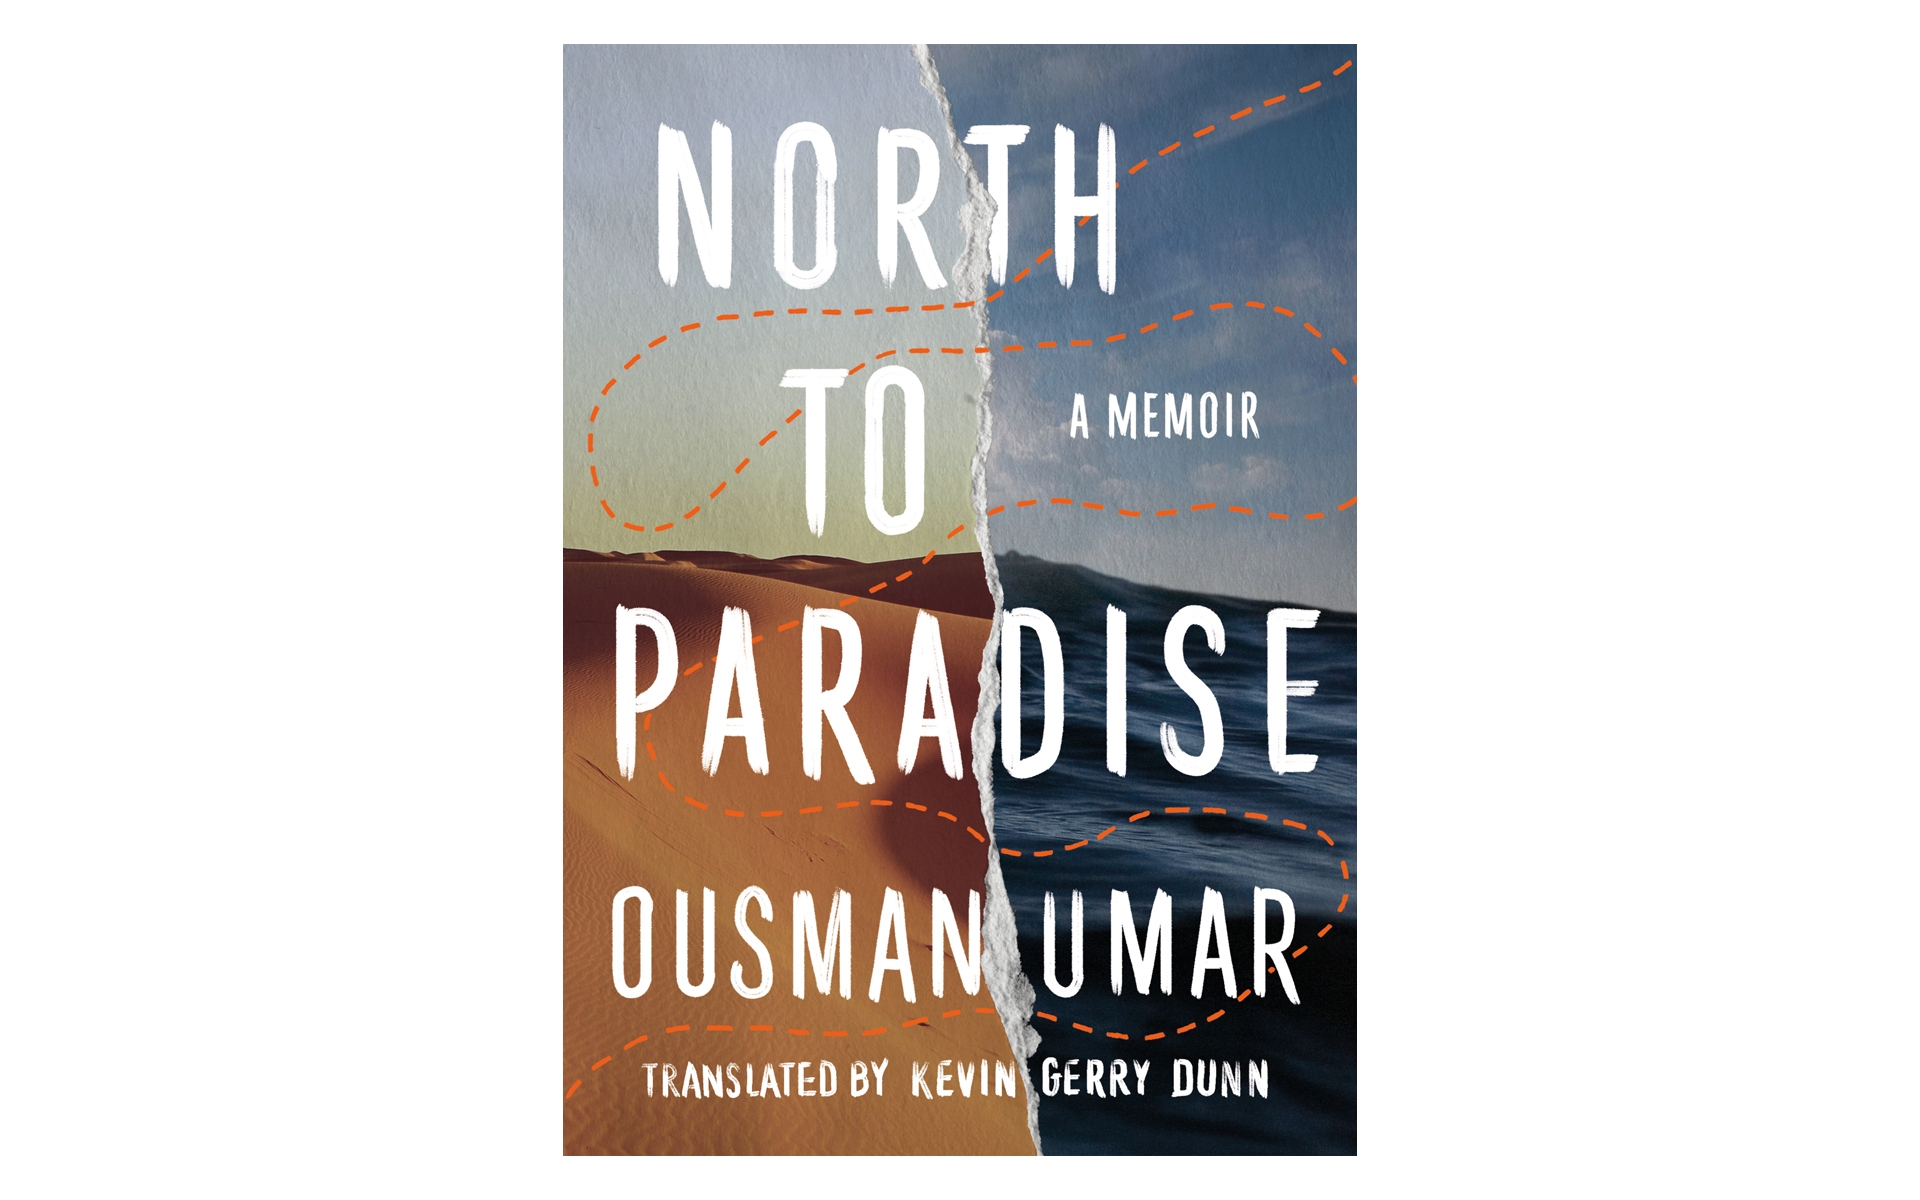  The cover art for the book "North to Paradise"